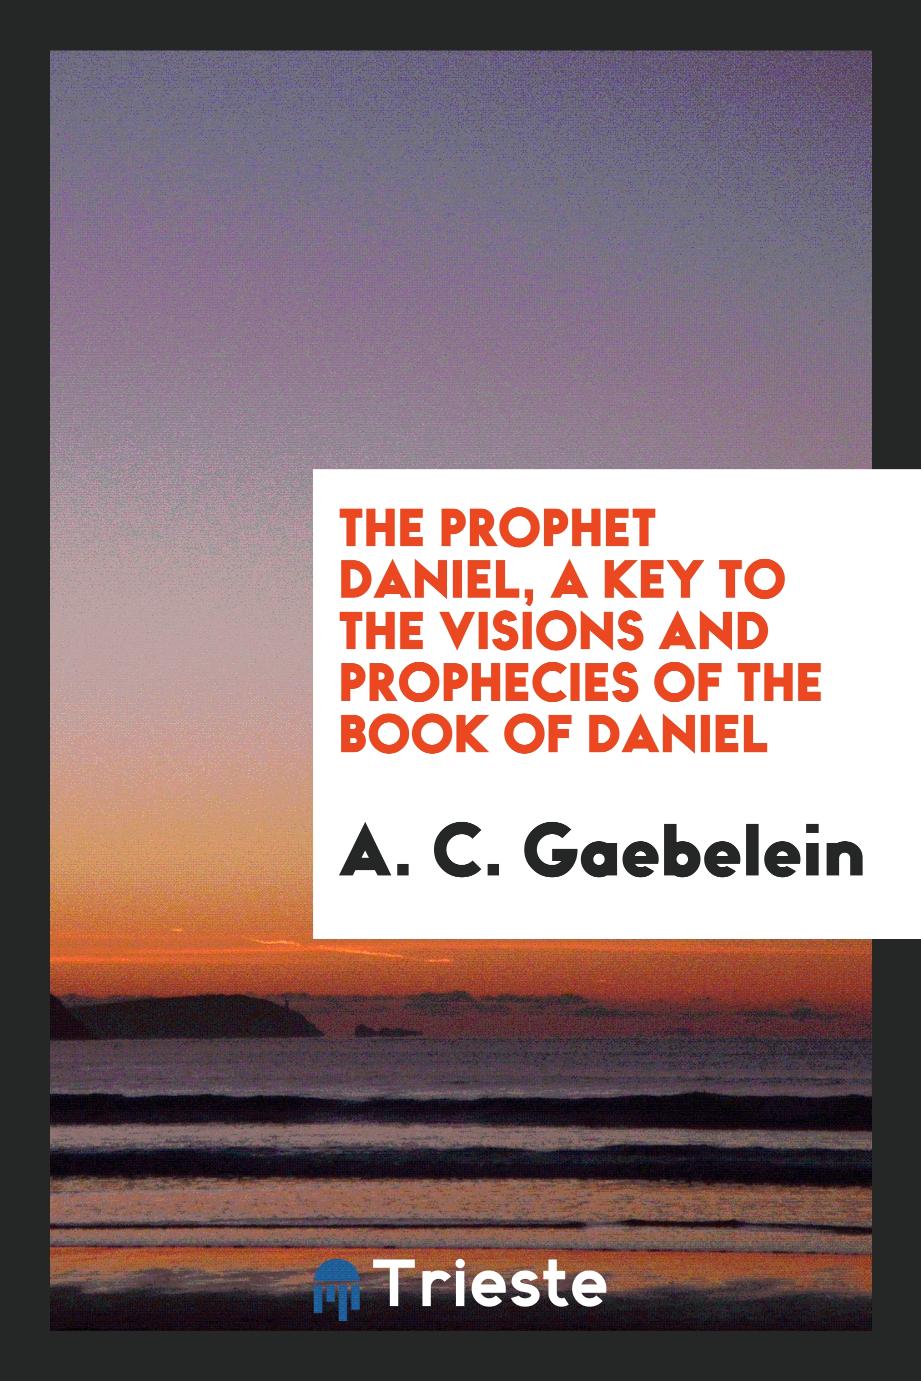 The Prophet Daniel, a key to the visions and prophecies of the Book of Daniel